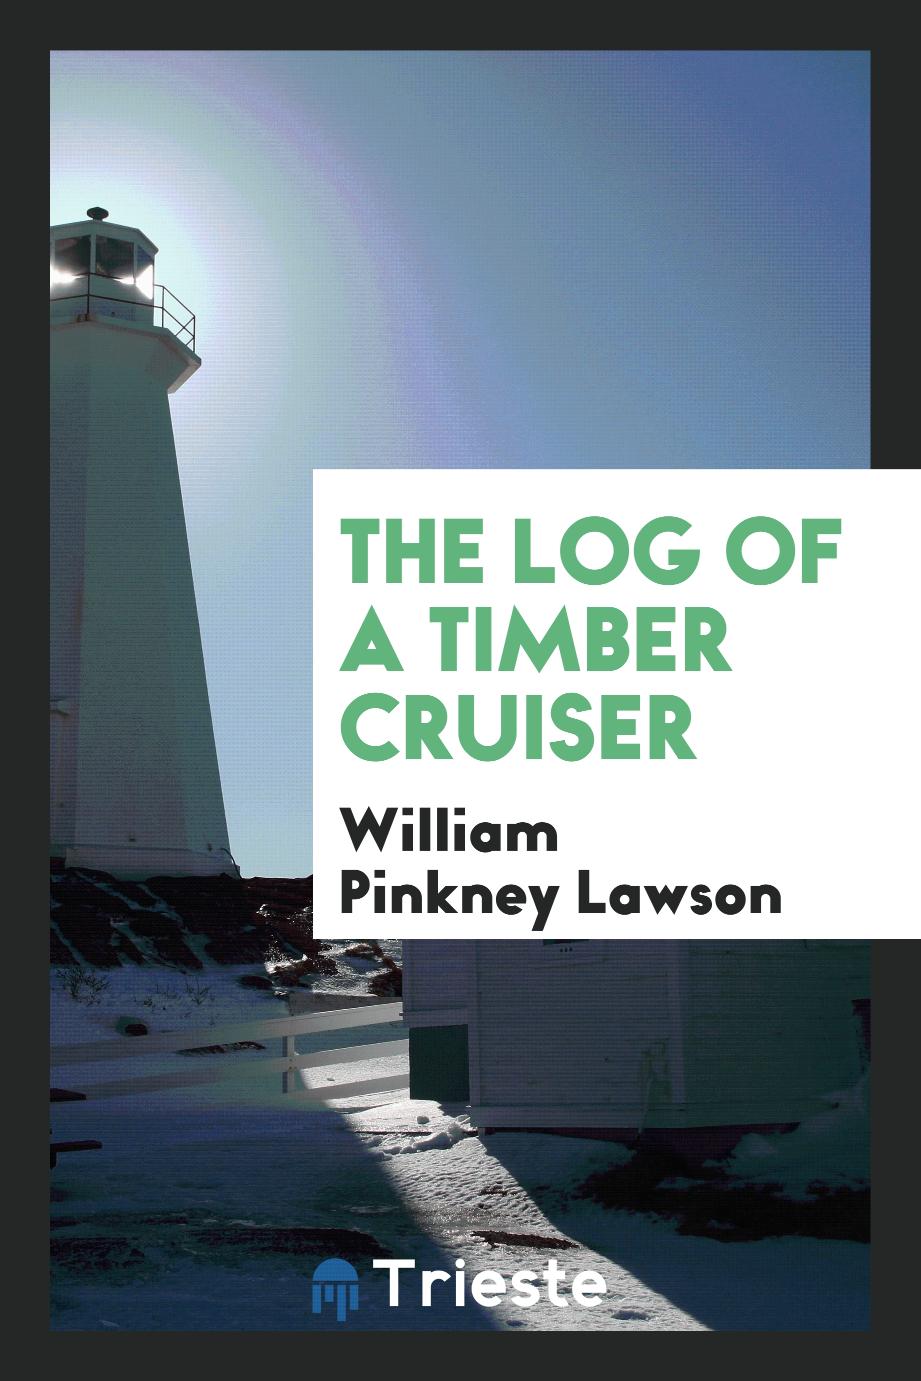 The Log of a Timber Cruiser